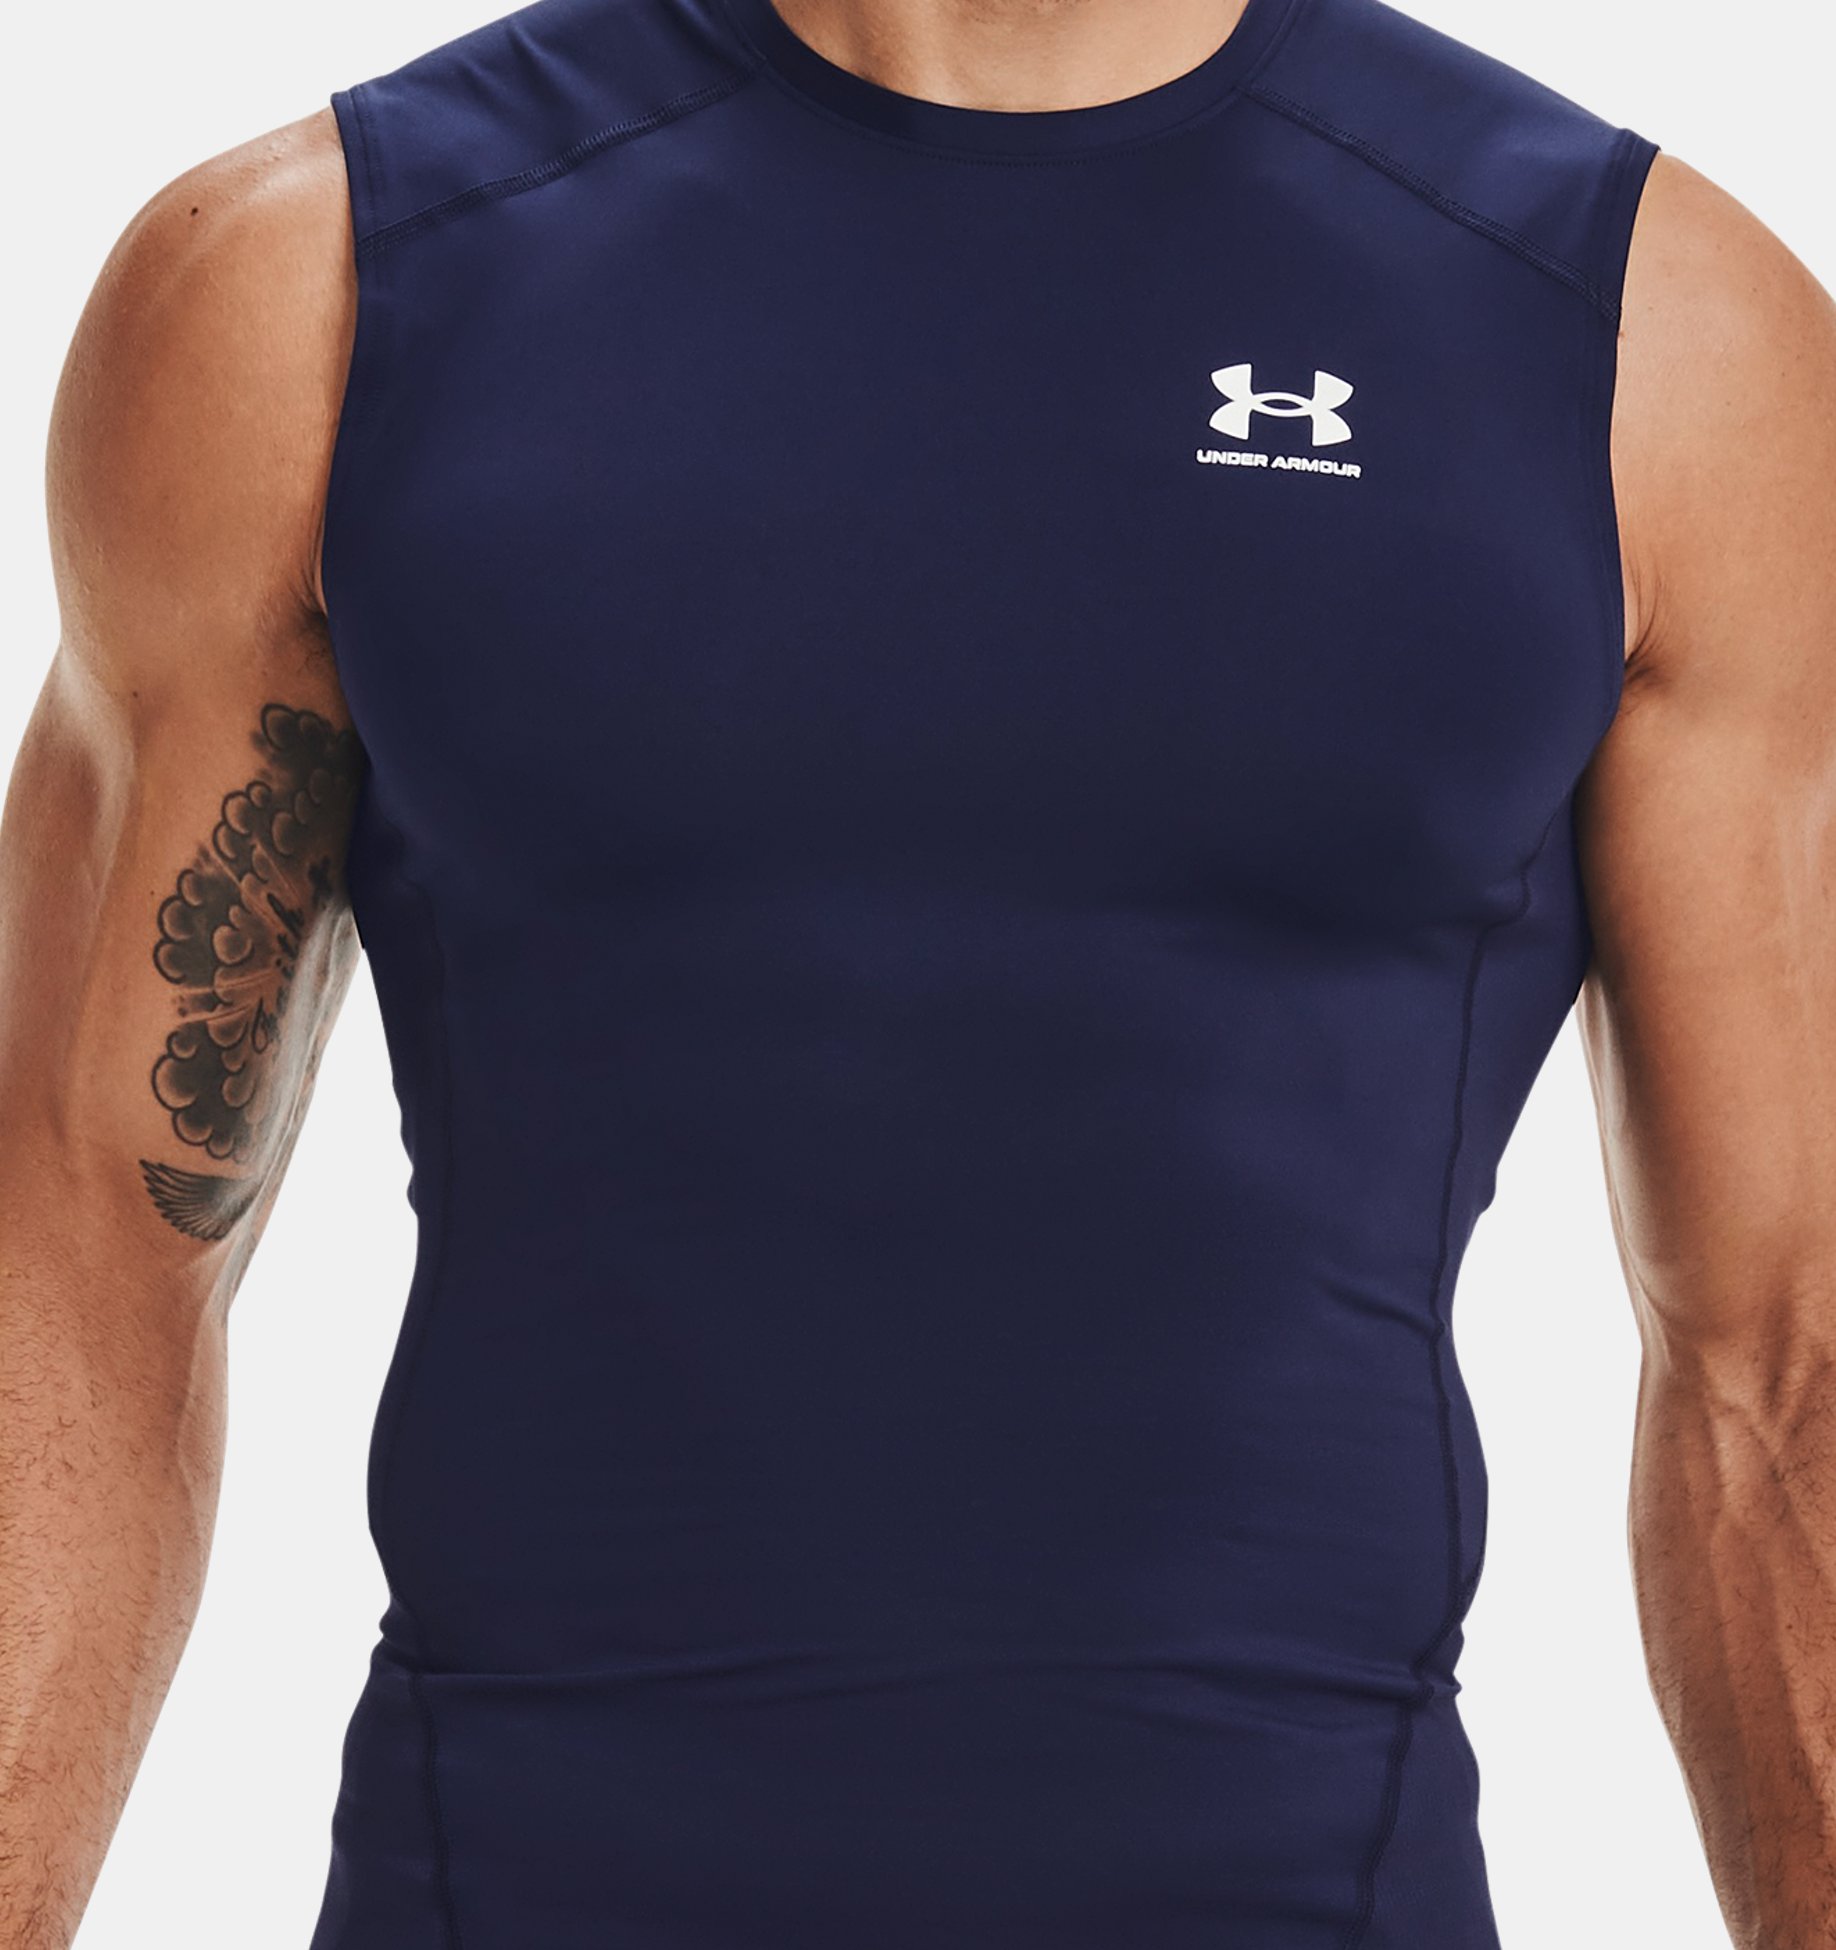 Under Armour Heatgear Compression Tank Top White/Black 1368352-100 - Free  Shipping at LASC